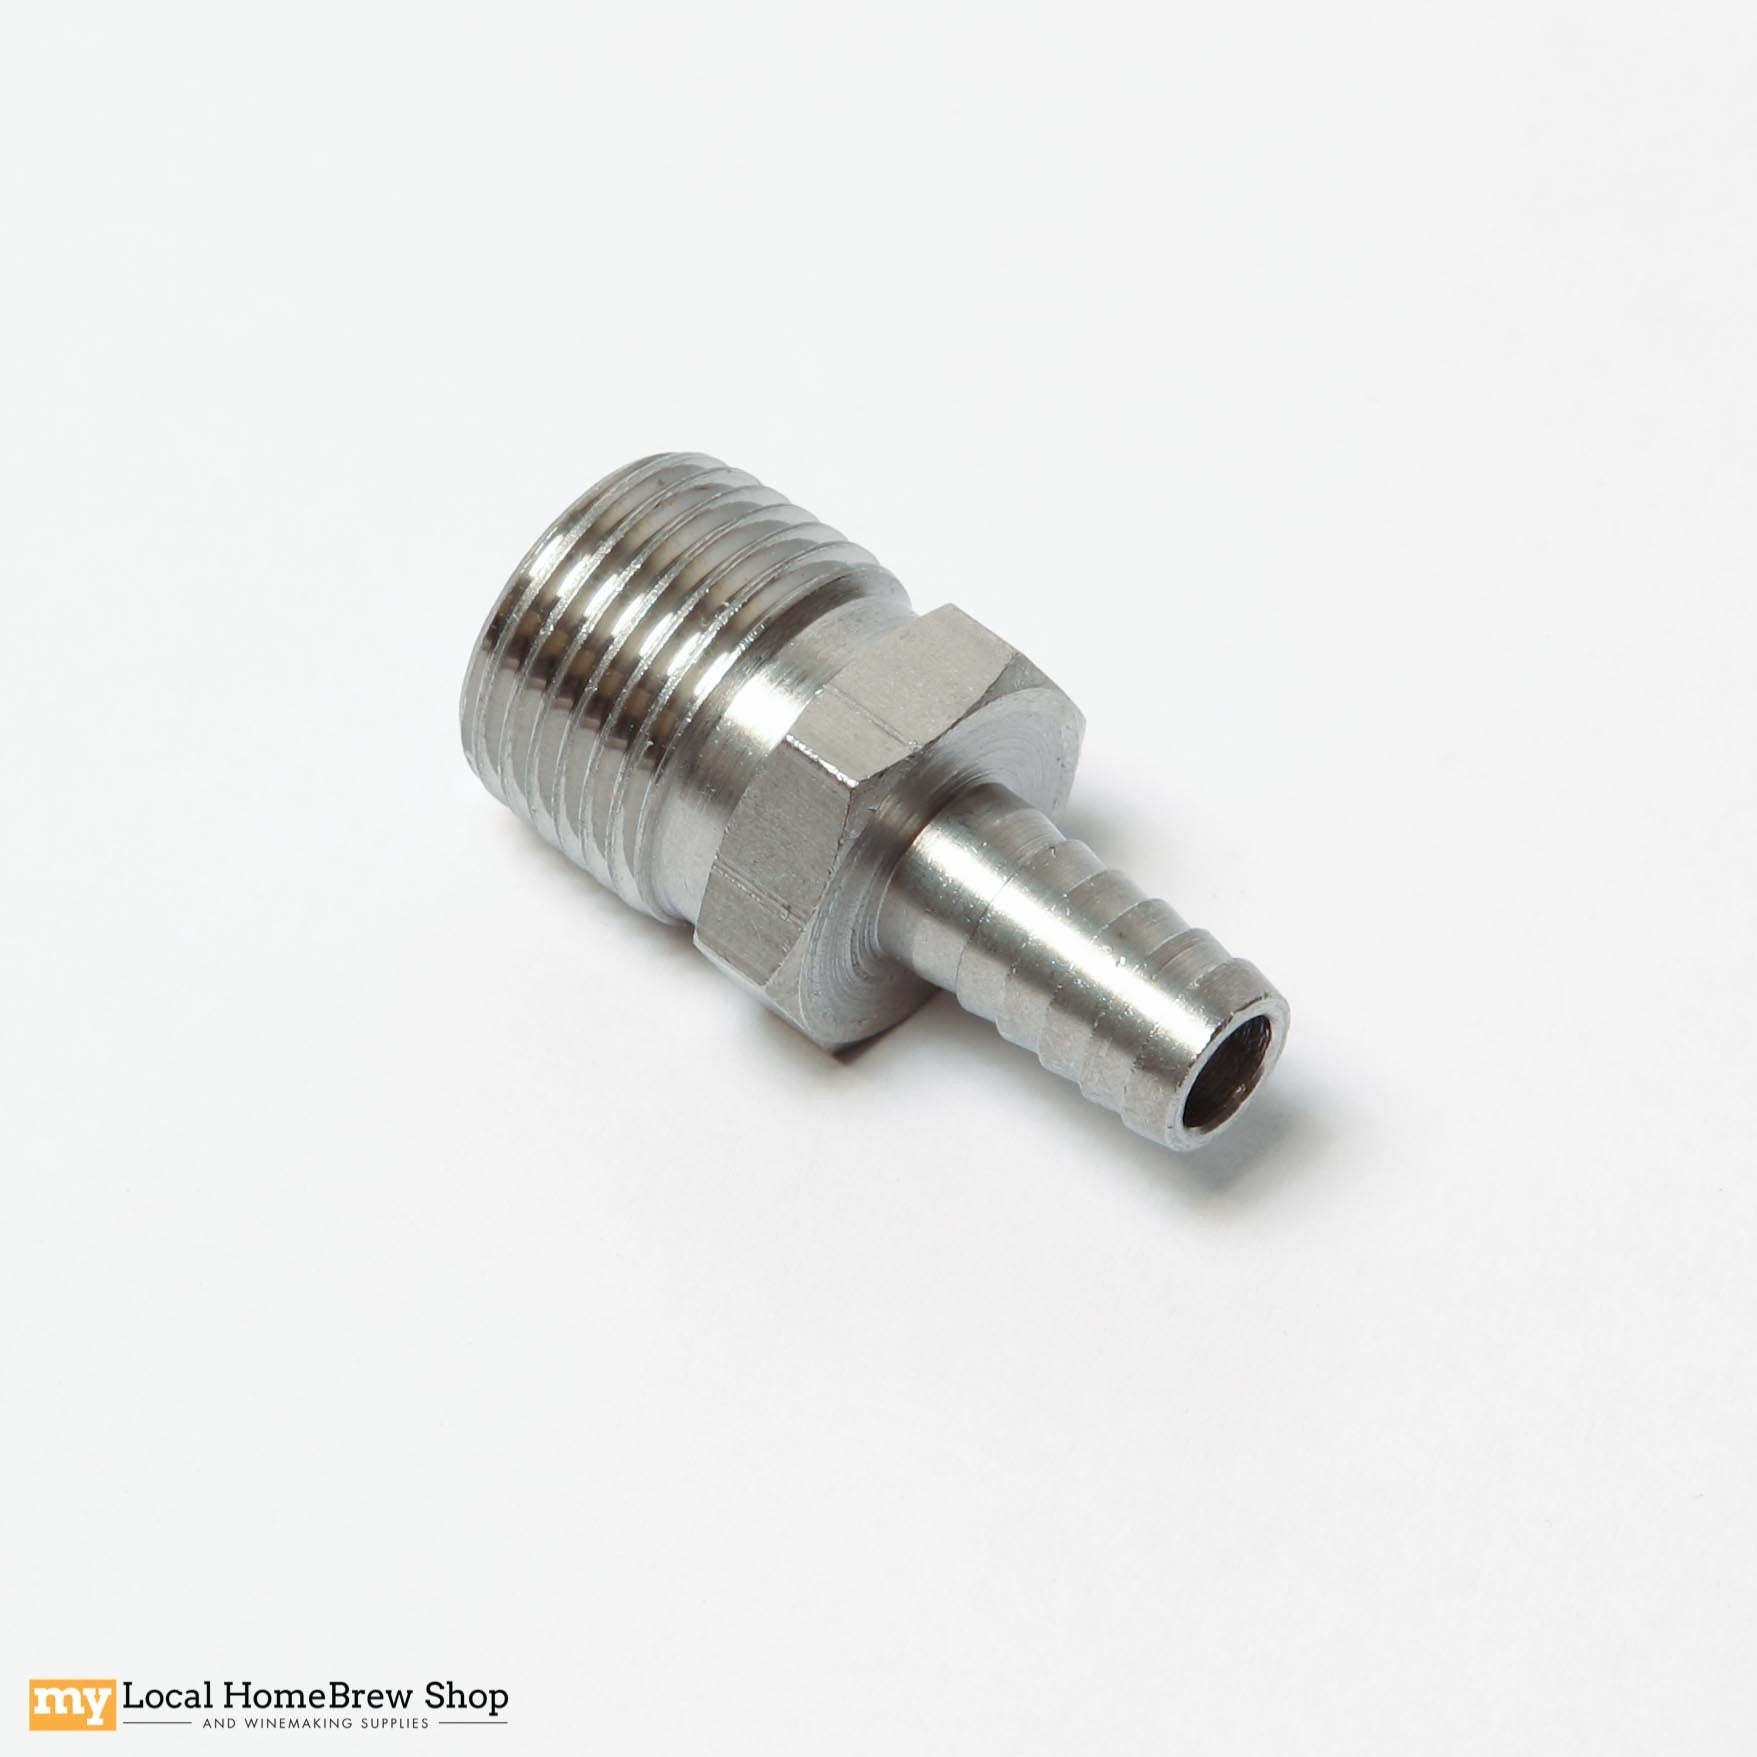 1/8 NPT to 3/16 Hose Barb Fitting